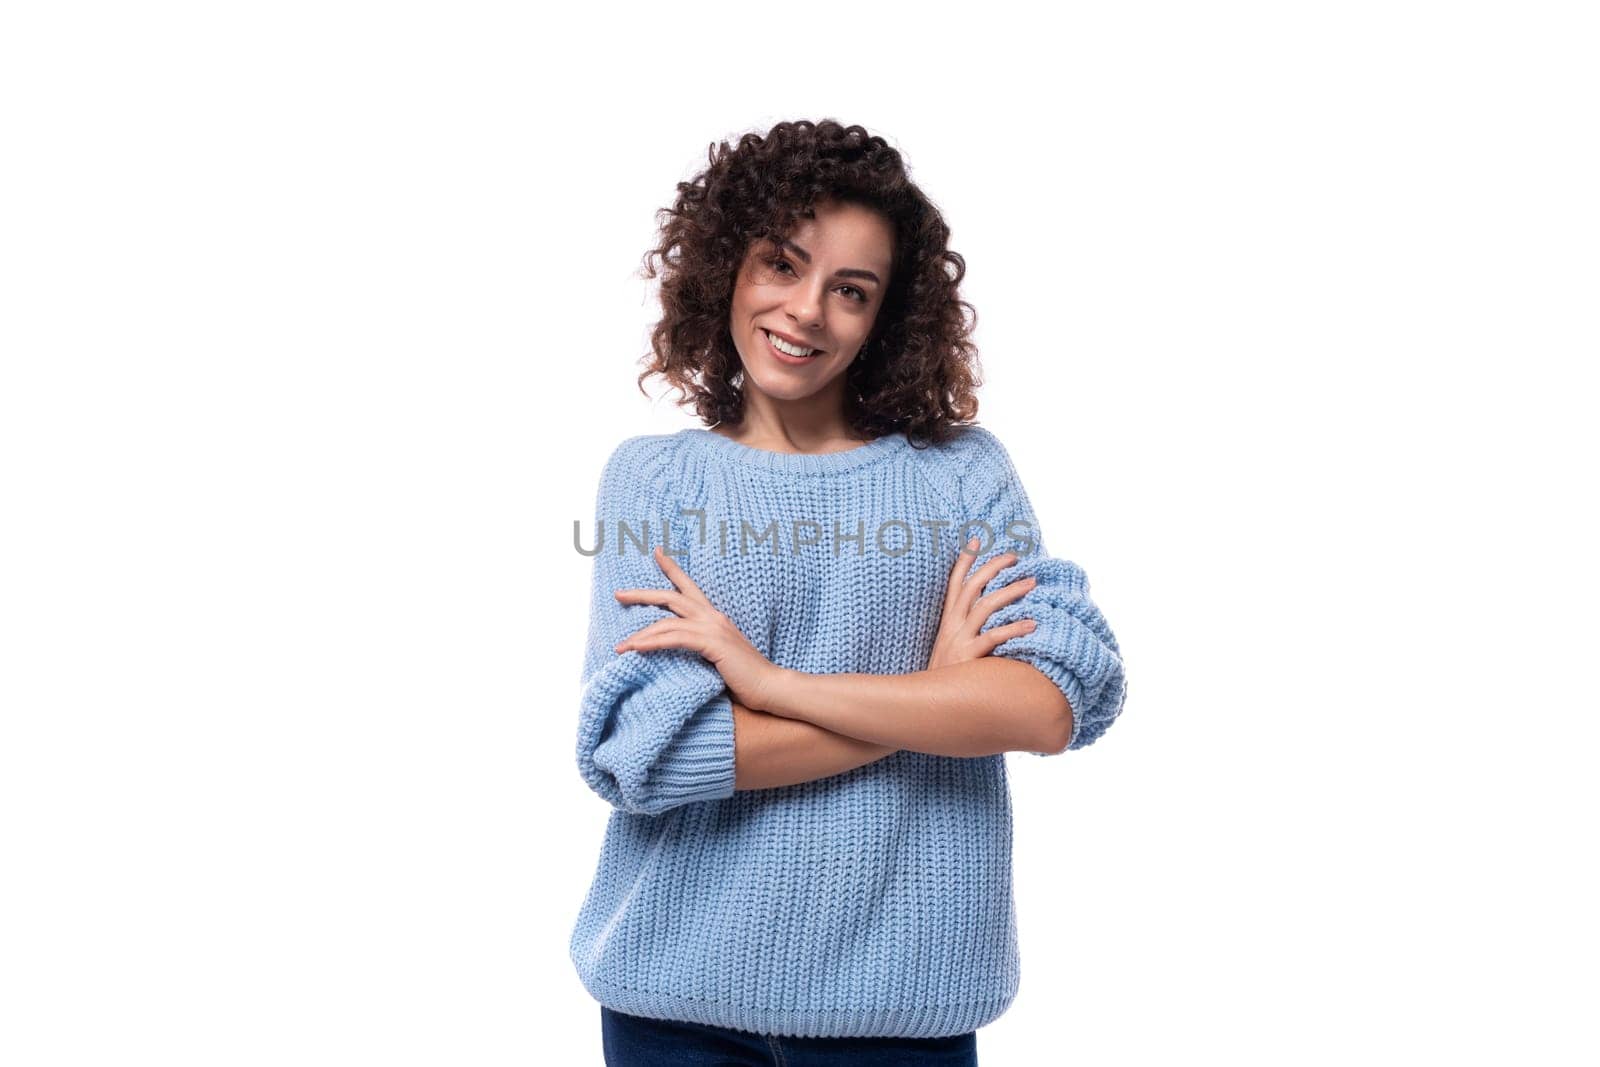 portrait of a young caucasian woman with curly natural dark hair dressed in a casual warm blue jacket.